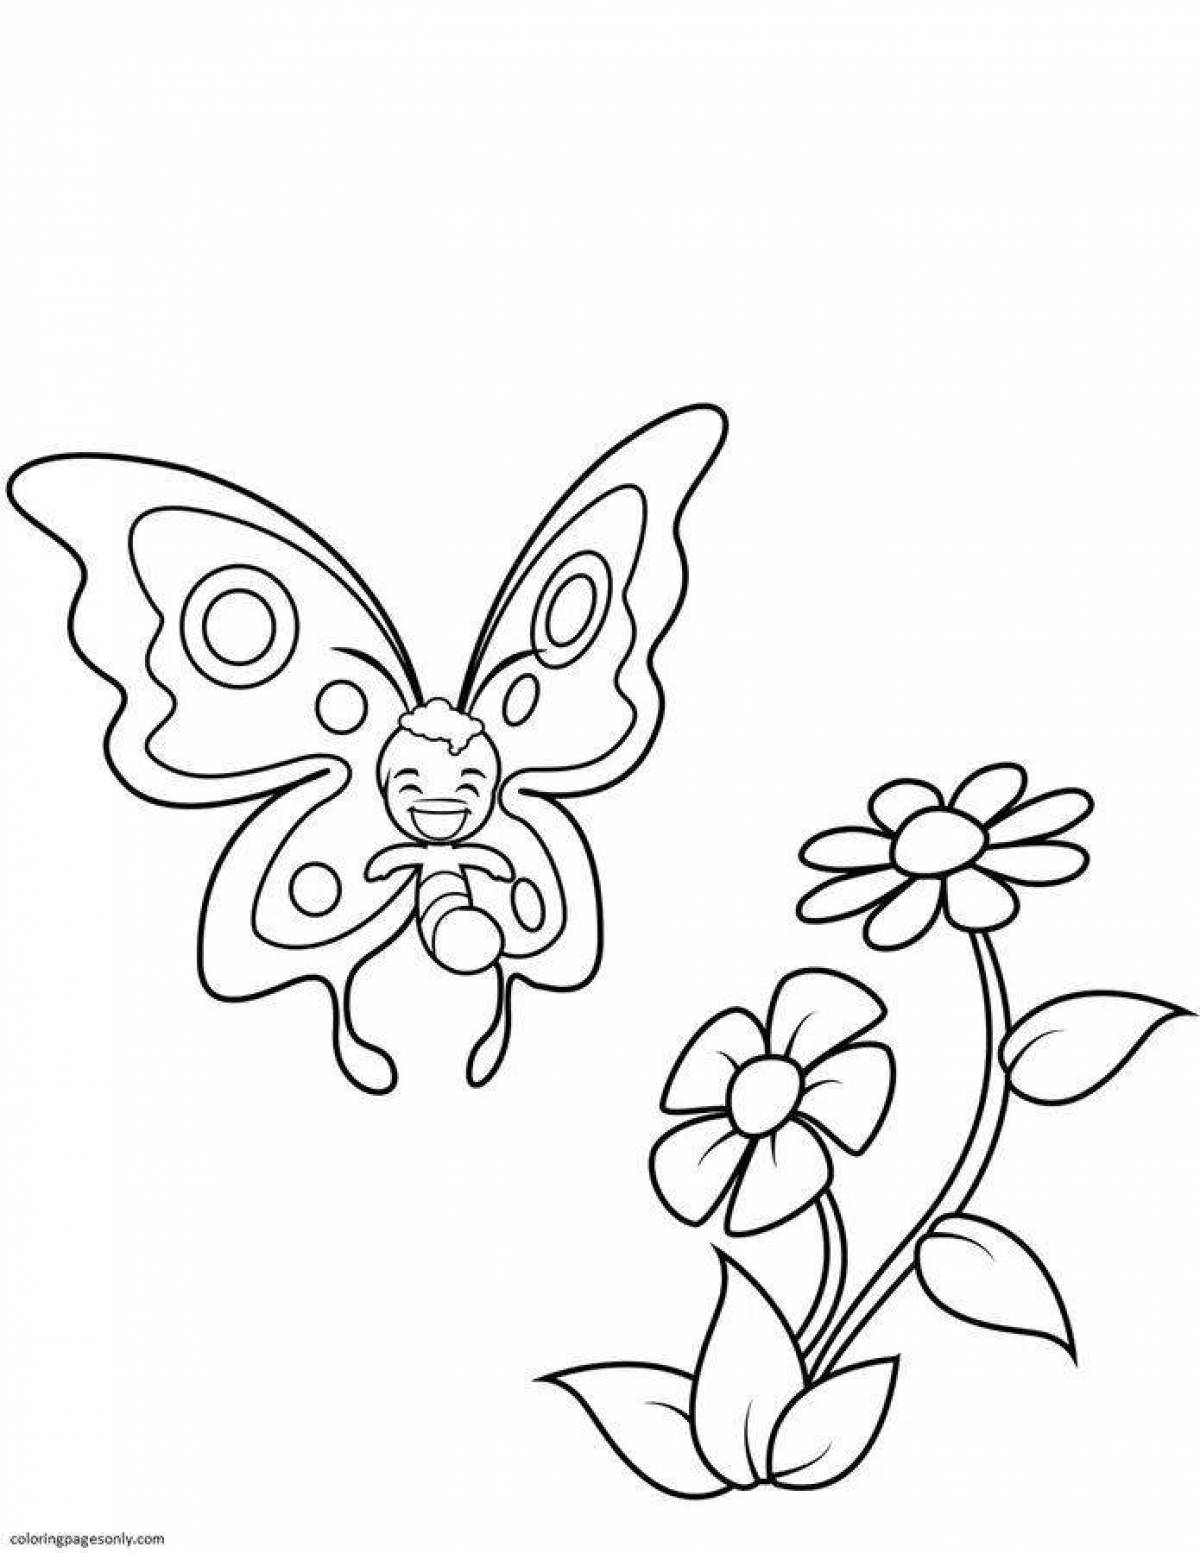 Luminous flowers and butterflies coloring pages